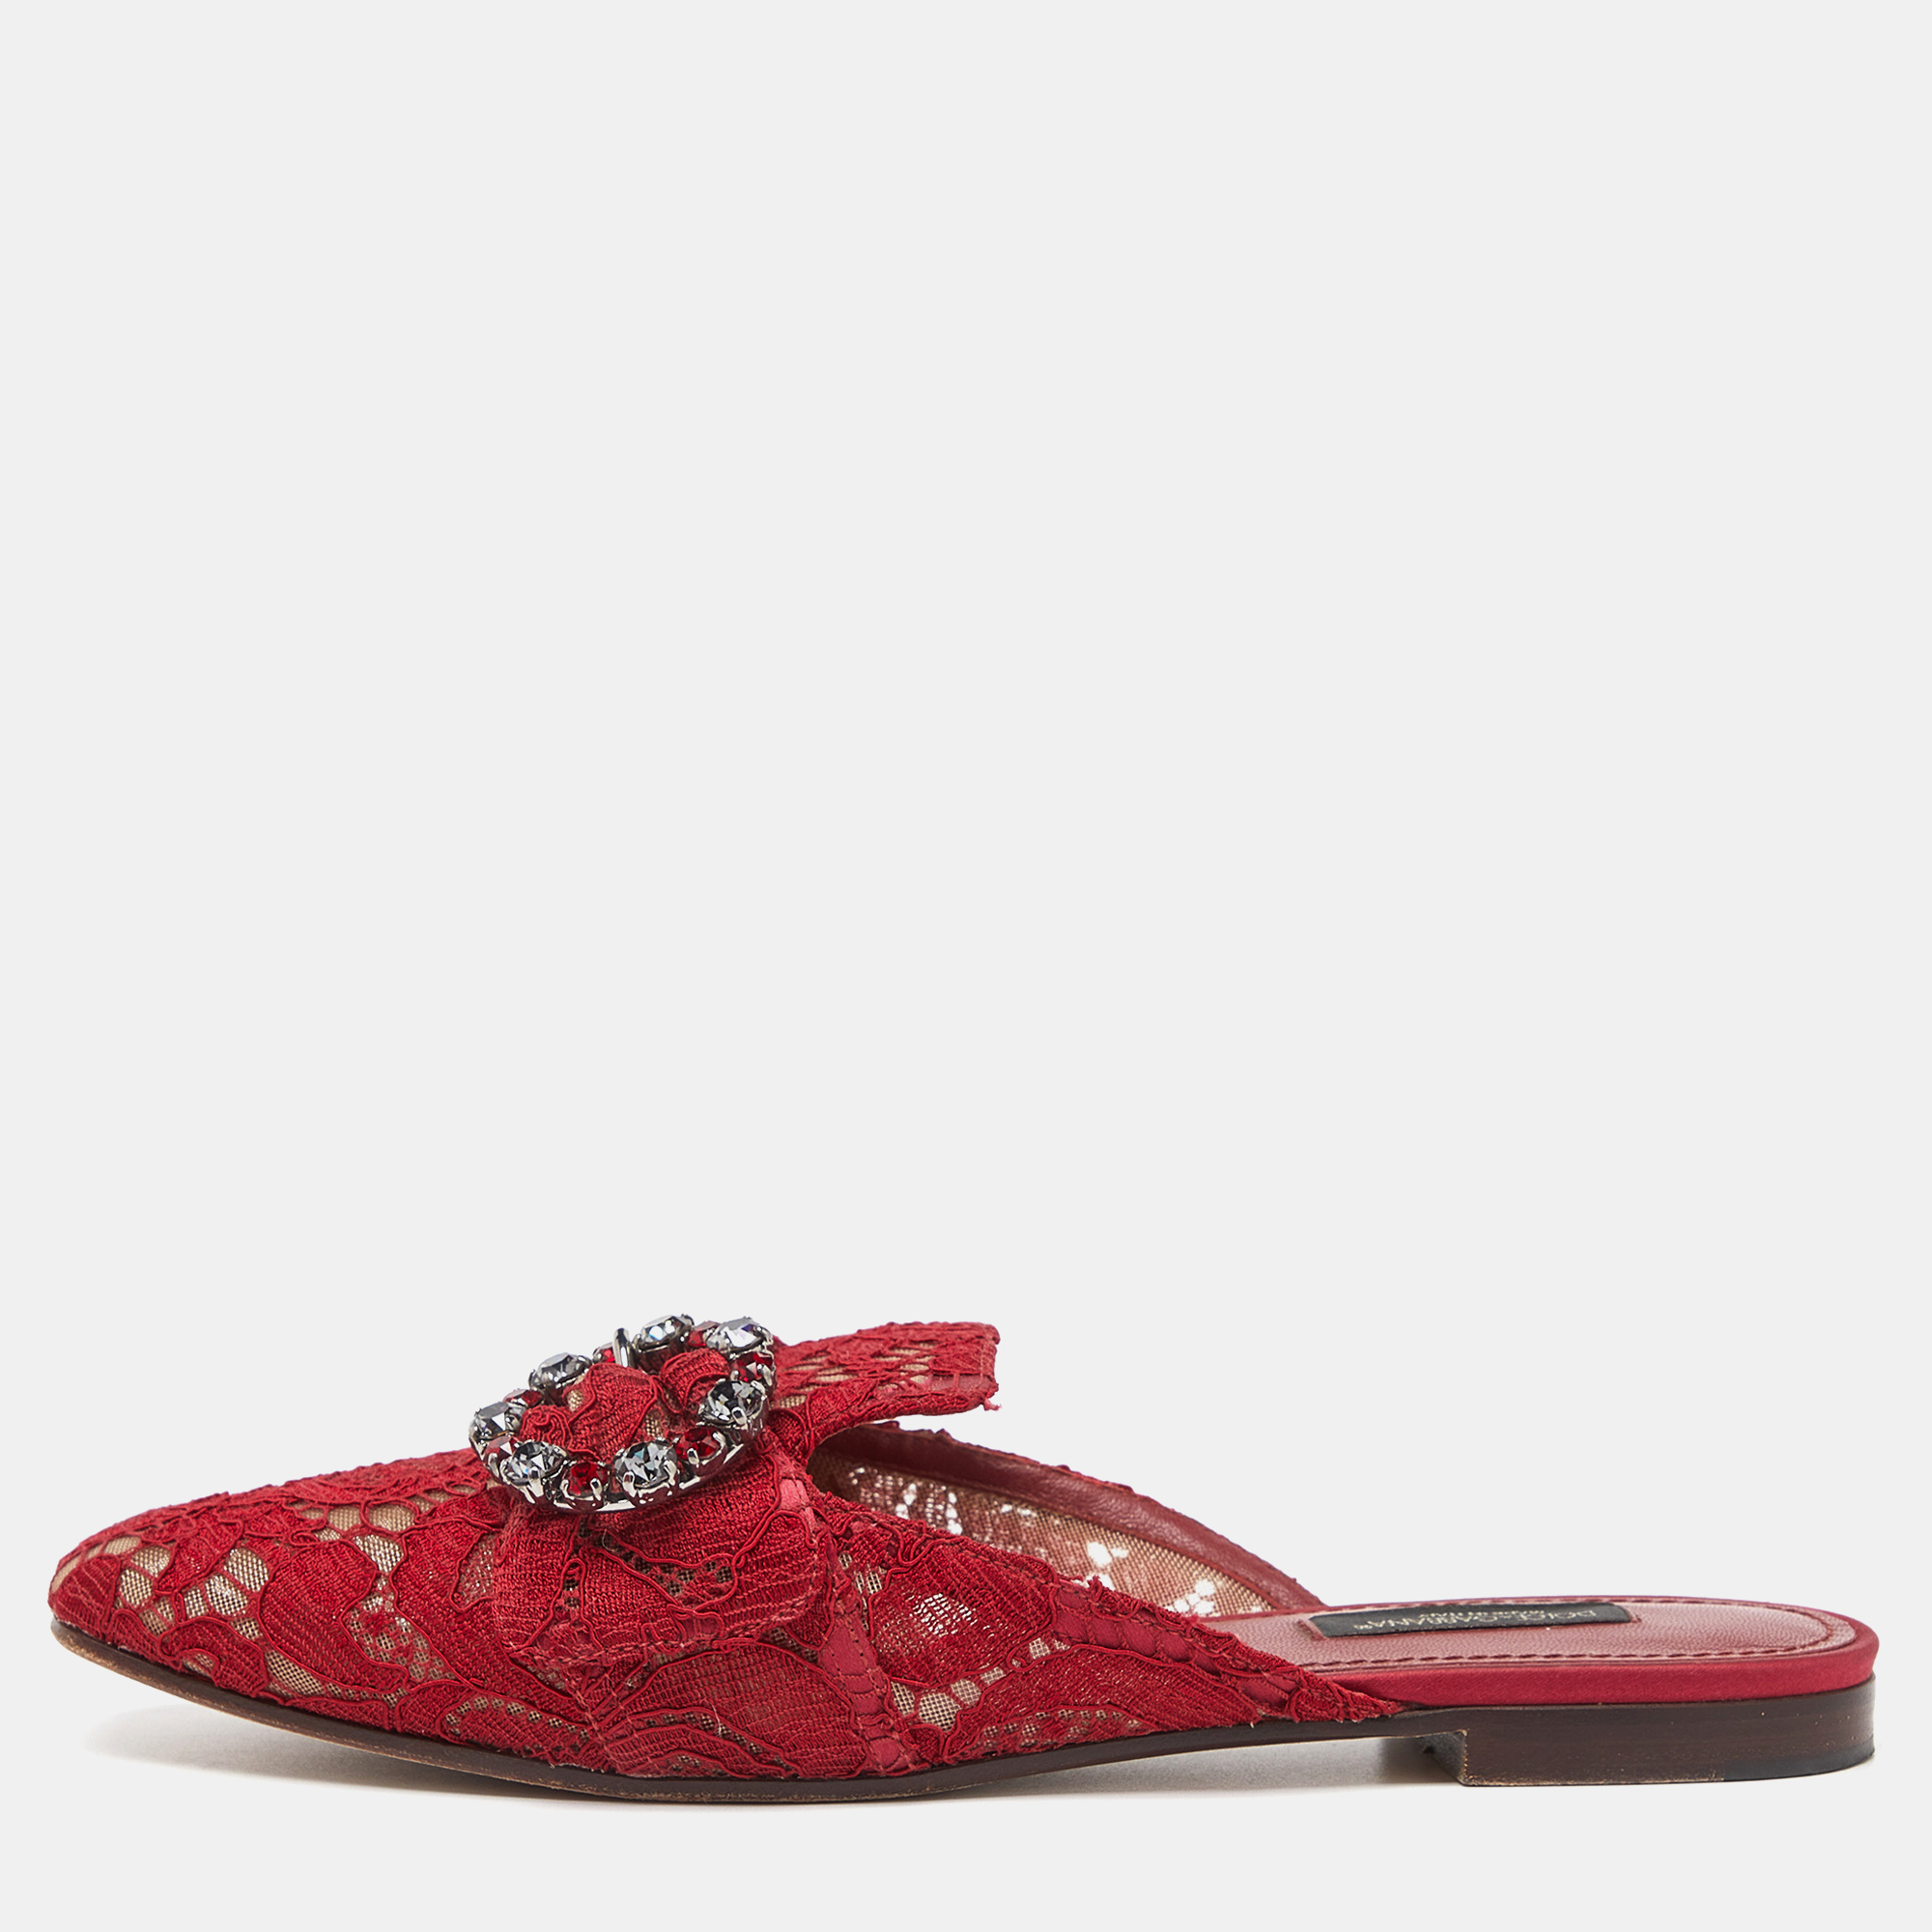 Pre-owned Dolce & Gabbana Red Lace Jackie Crystal Embellished Buckle Flat Mules Size 37.5